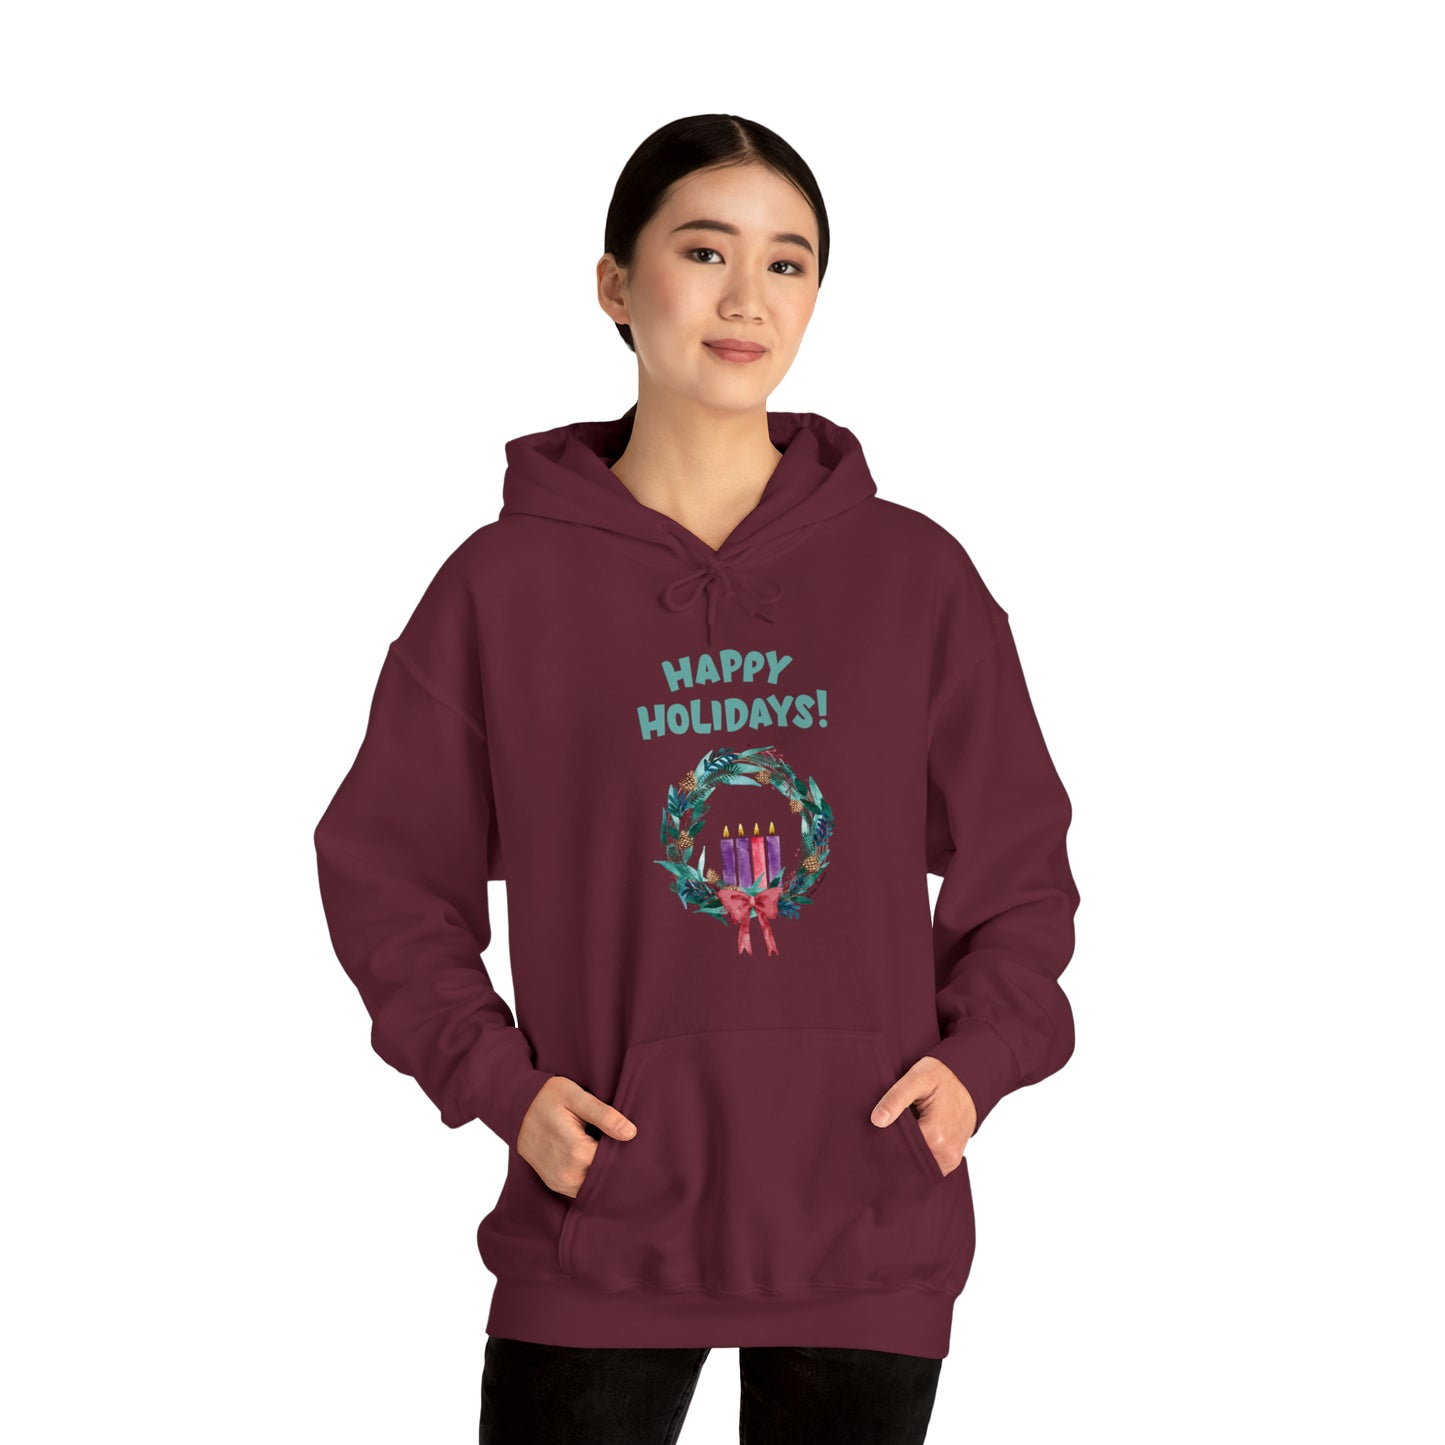 Mock up of a petite woman wearing the Maroon shirt